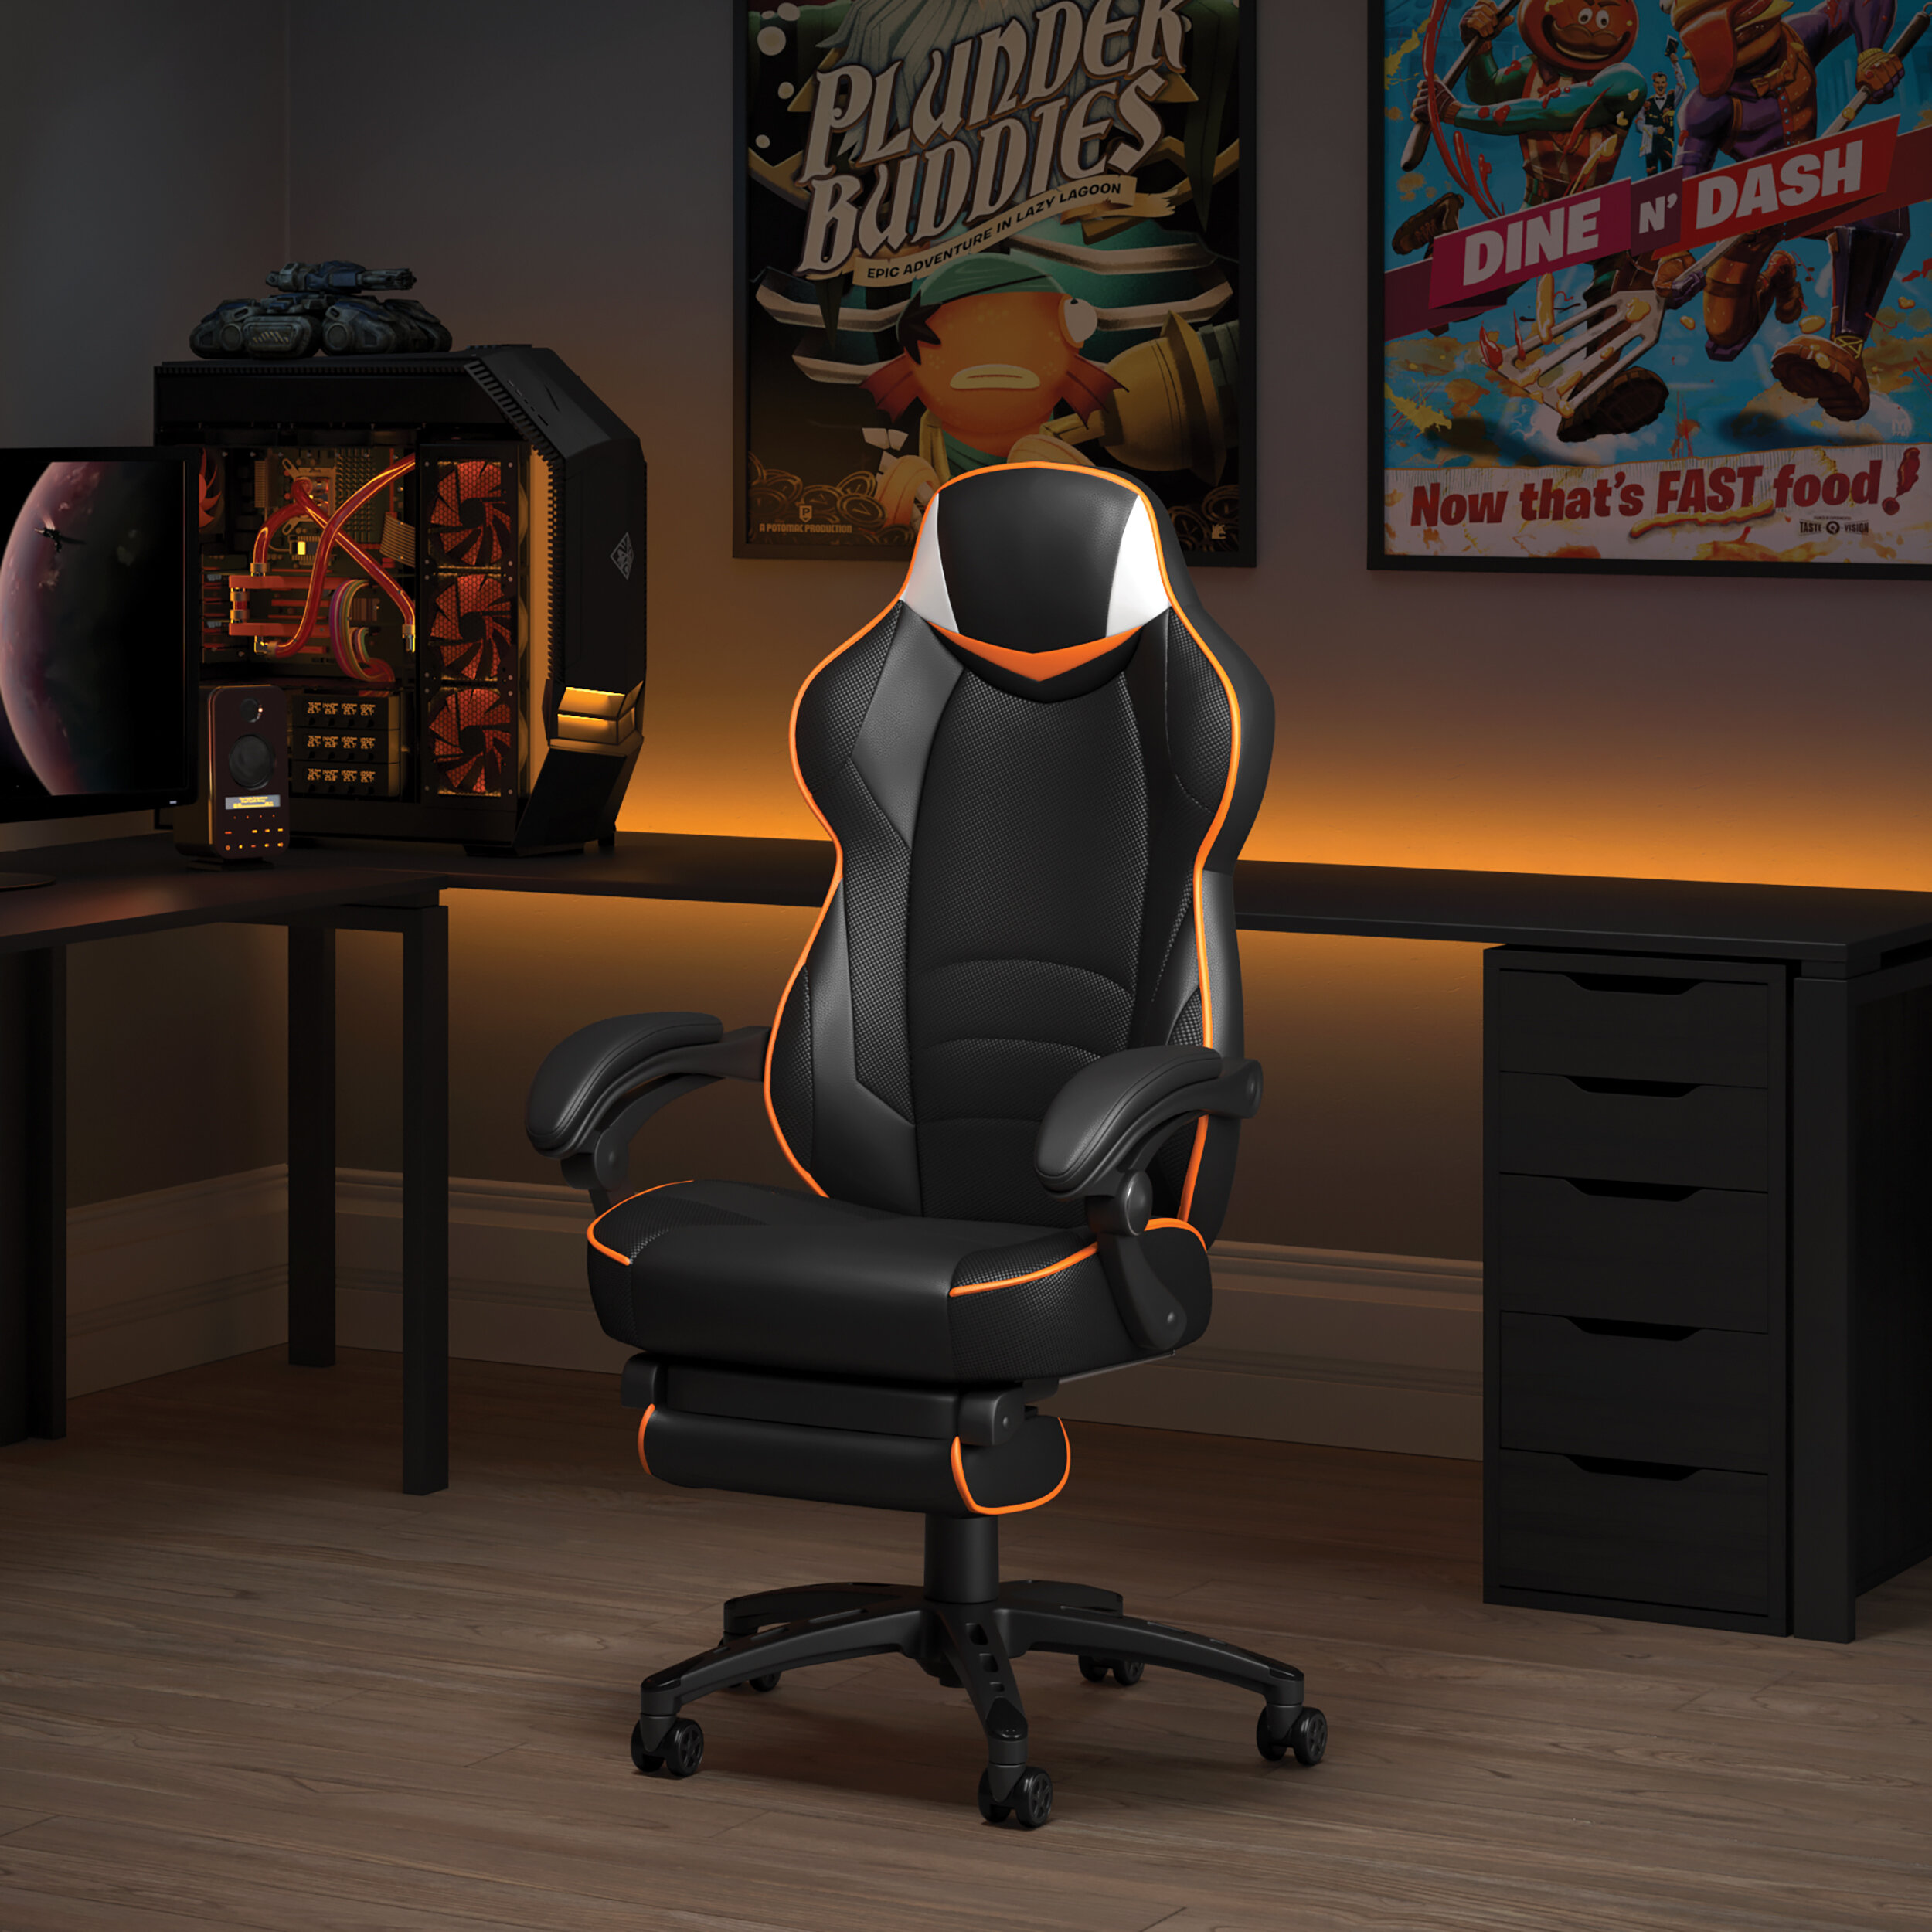 Fortnite Racing Style Gaming Rocker Chair CHOOSE STYLE by OFM